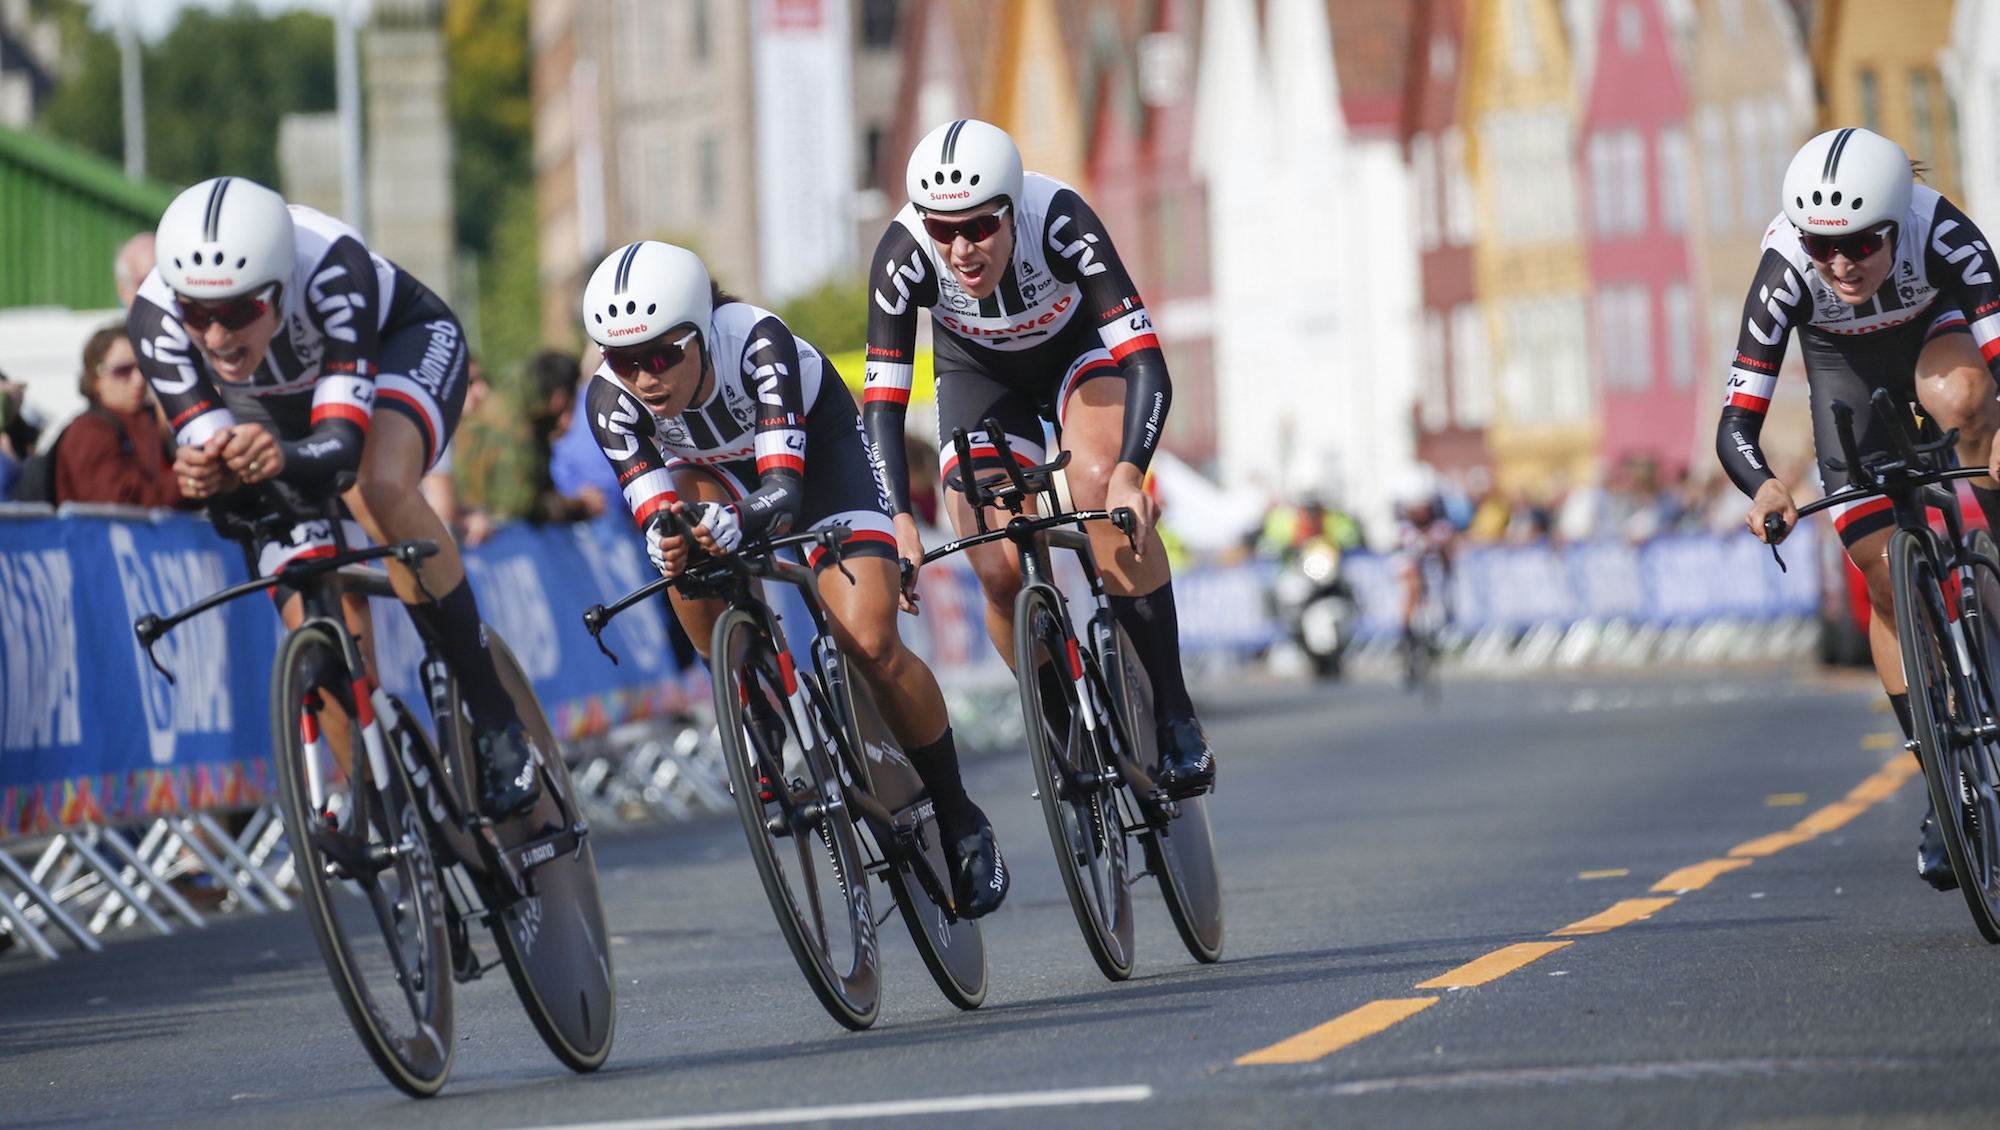 Bergen - Norway - wielrennen - cycling - cyclisme - radsport - Lucinda Brand (Netherlands / Sunweb) - Coryn Rivera (USA / Sunweb) - Ellen Van Dijk (Netherlands / Sunweb) - Leah Kirchmann (Canada / Sunweb) pictured during the Team Time Trial 2017 World Road Championship womens cyclingrace on September 17, 2017 in Bergen, Norway  - photo Dion Kerckhoffs/Cor Vos © 2017